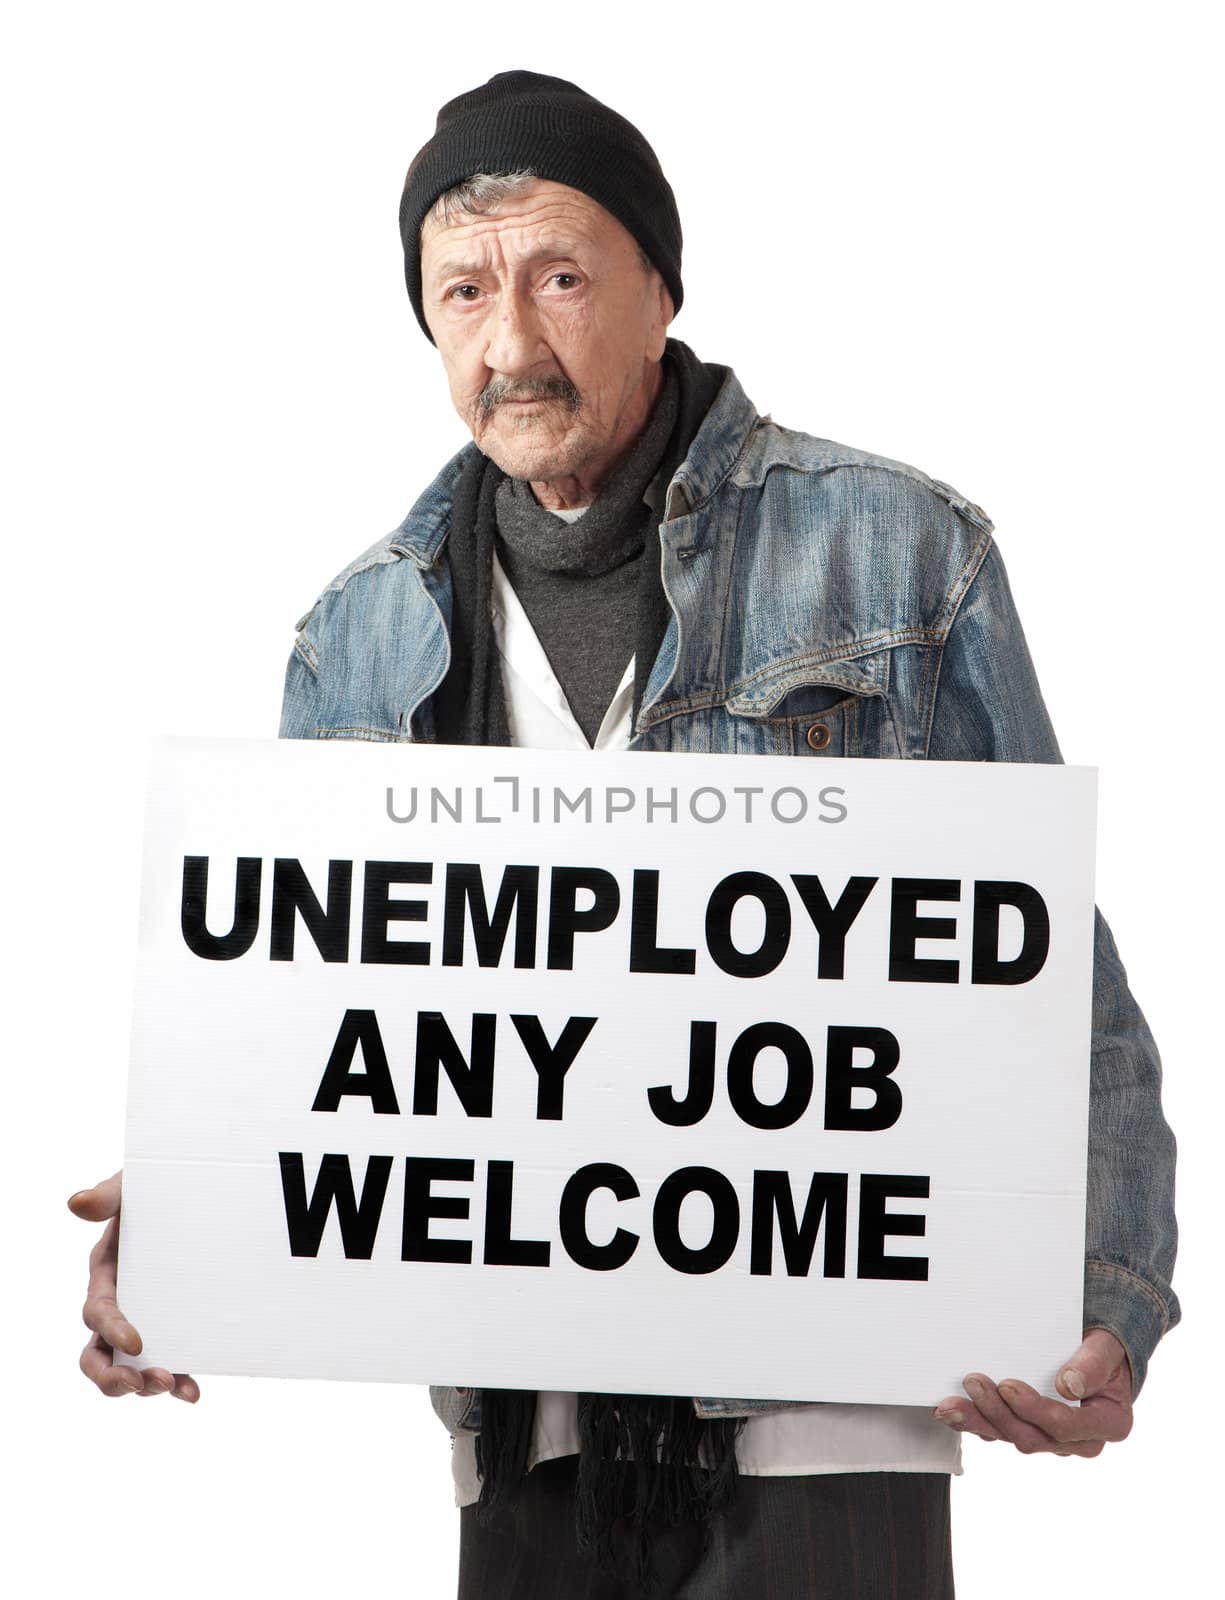 An unemployed senior man advertises himself in an attempt to become employed.